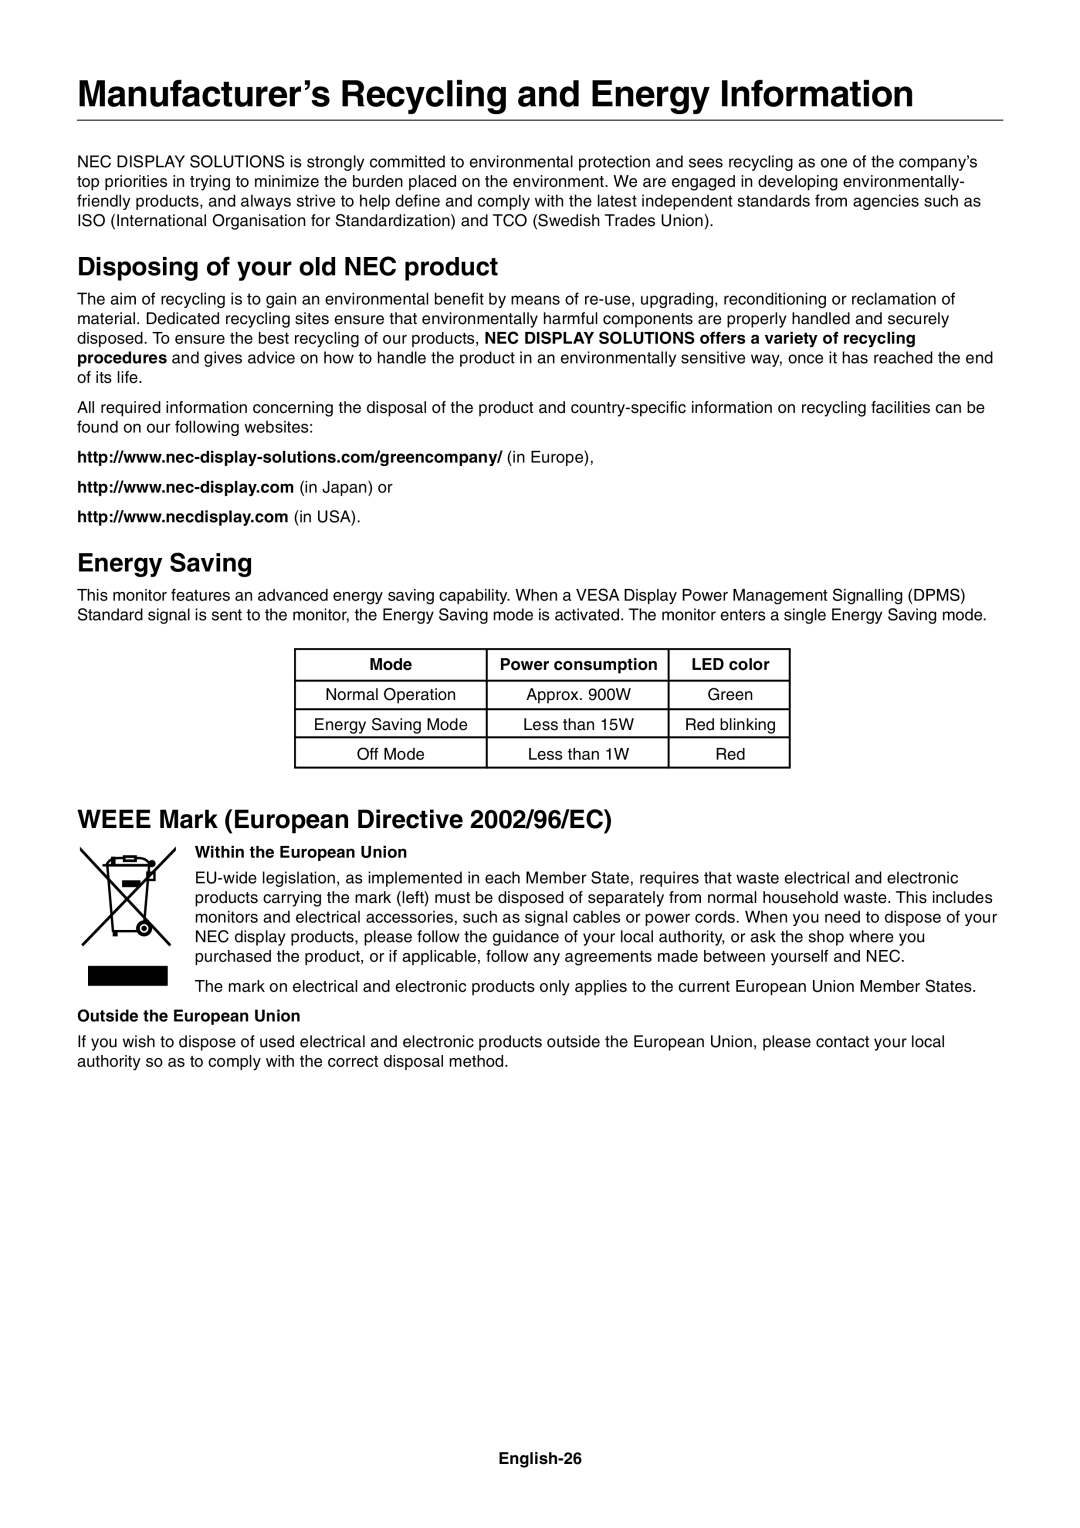 NEC LCD8205-P user manual Manufacturer’s Recycling and Energy Information, Disposing of your old NEC product, Energy Saving 